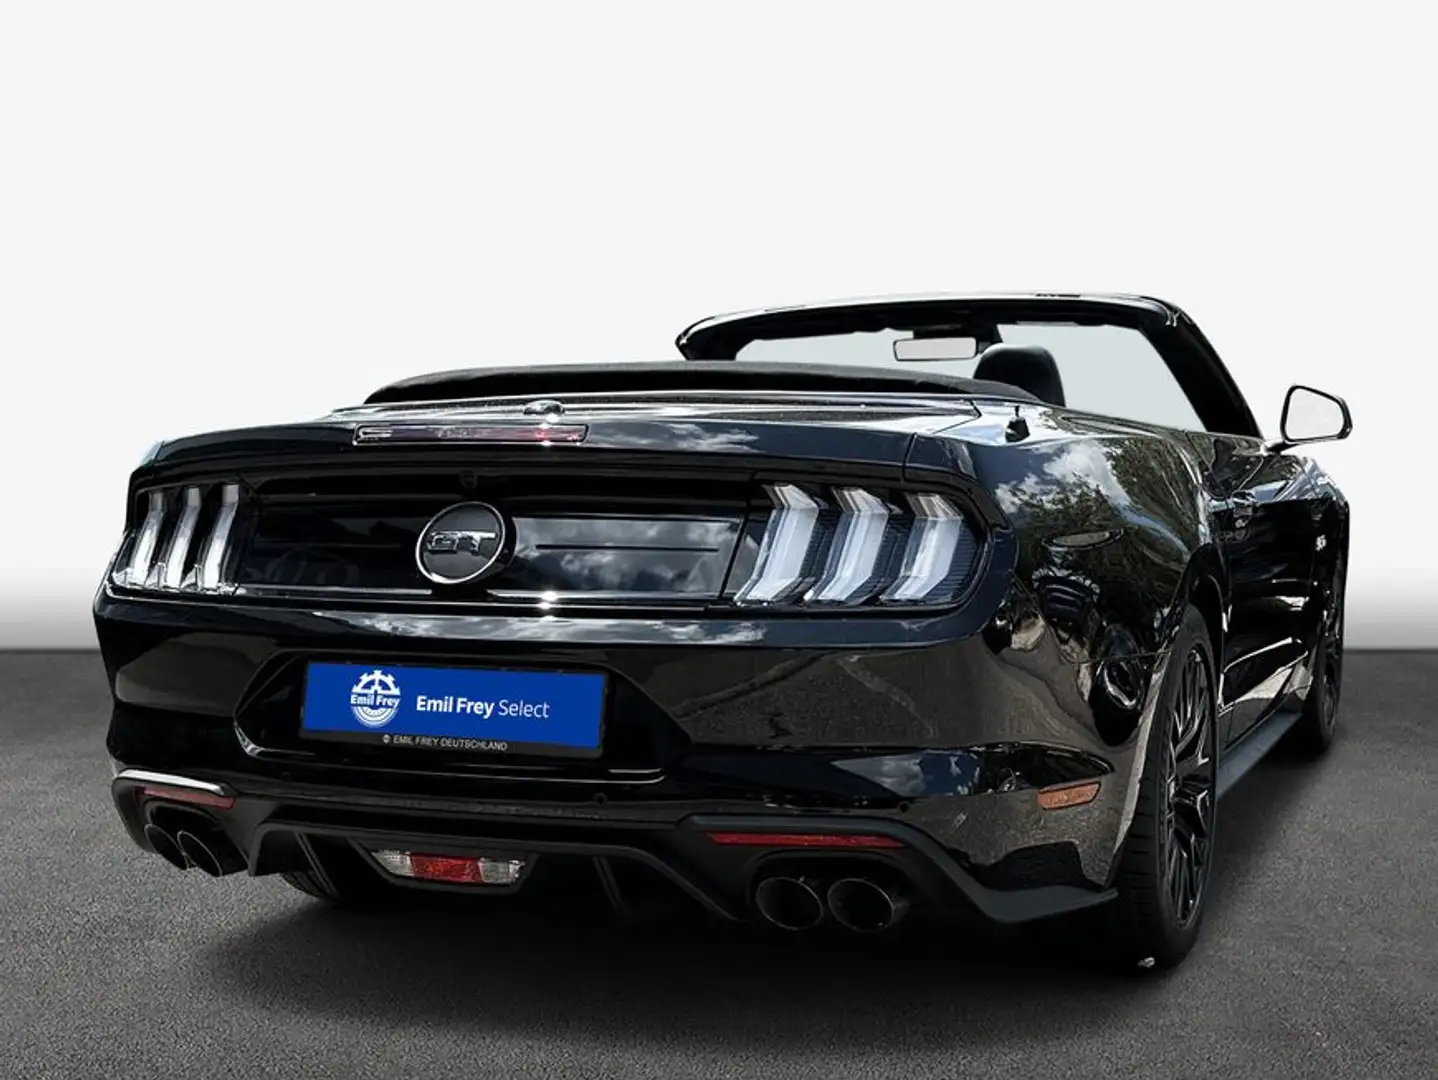 Ford Mustang Convertible 5.0 Ti-VCT V8 Aut. GT 330 kW, Schwarz - 2